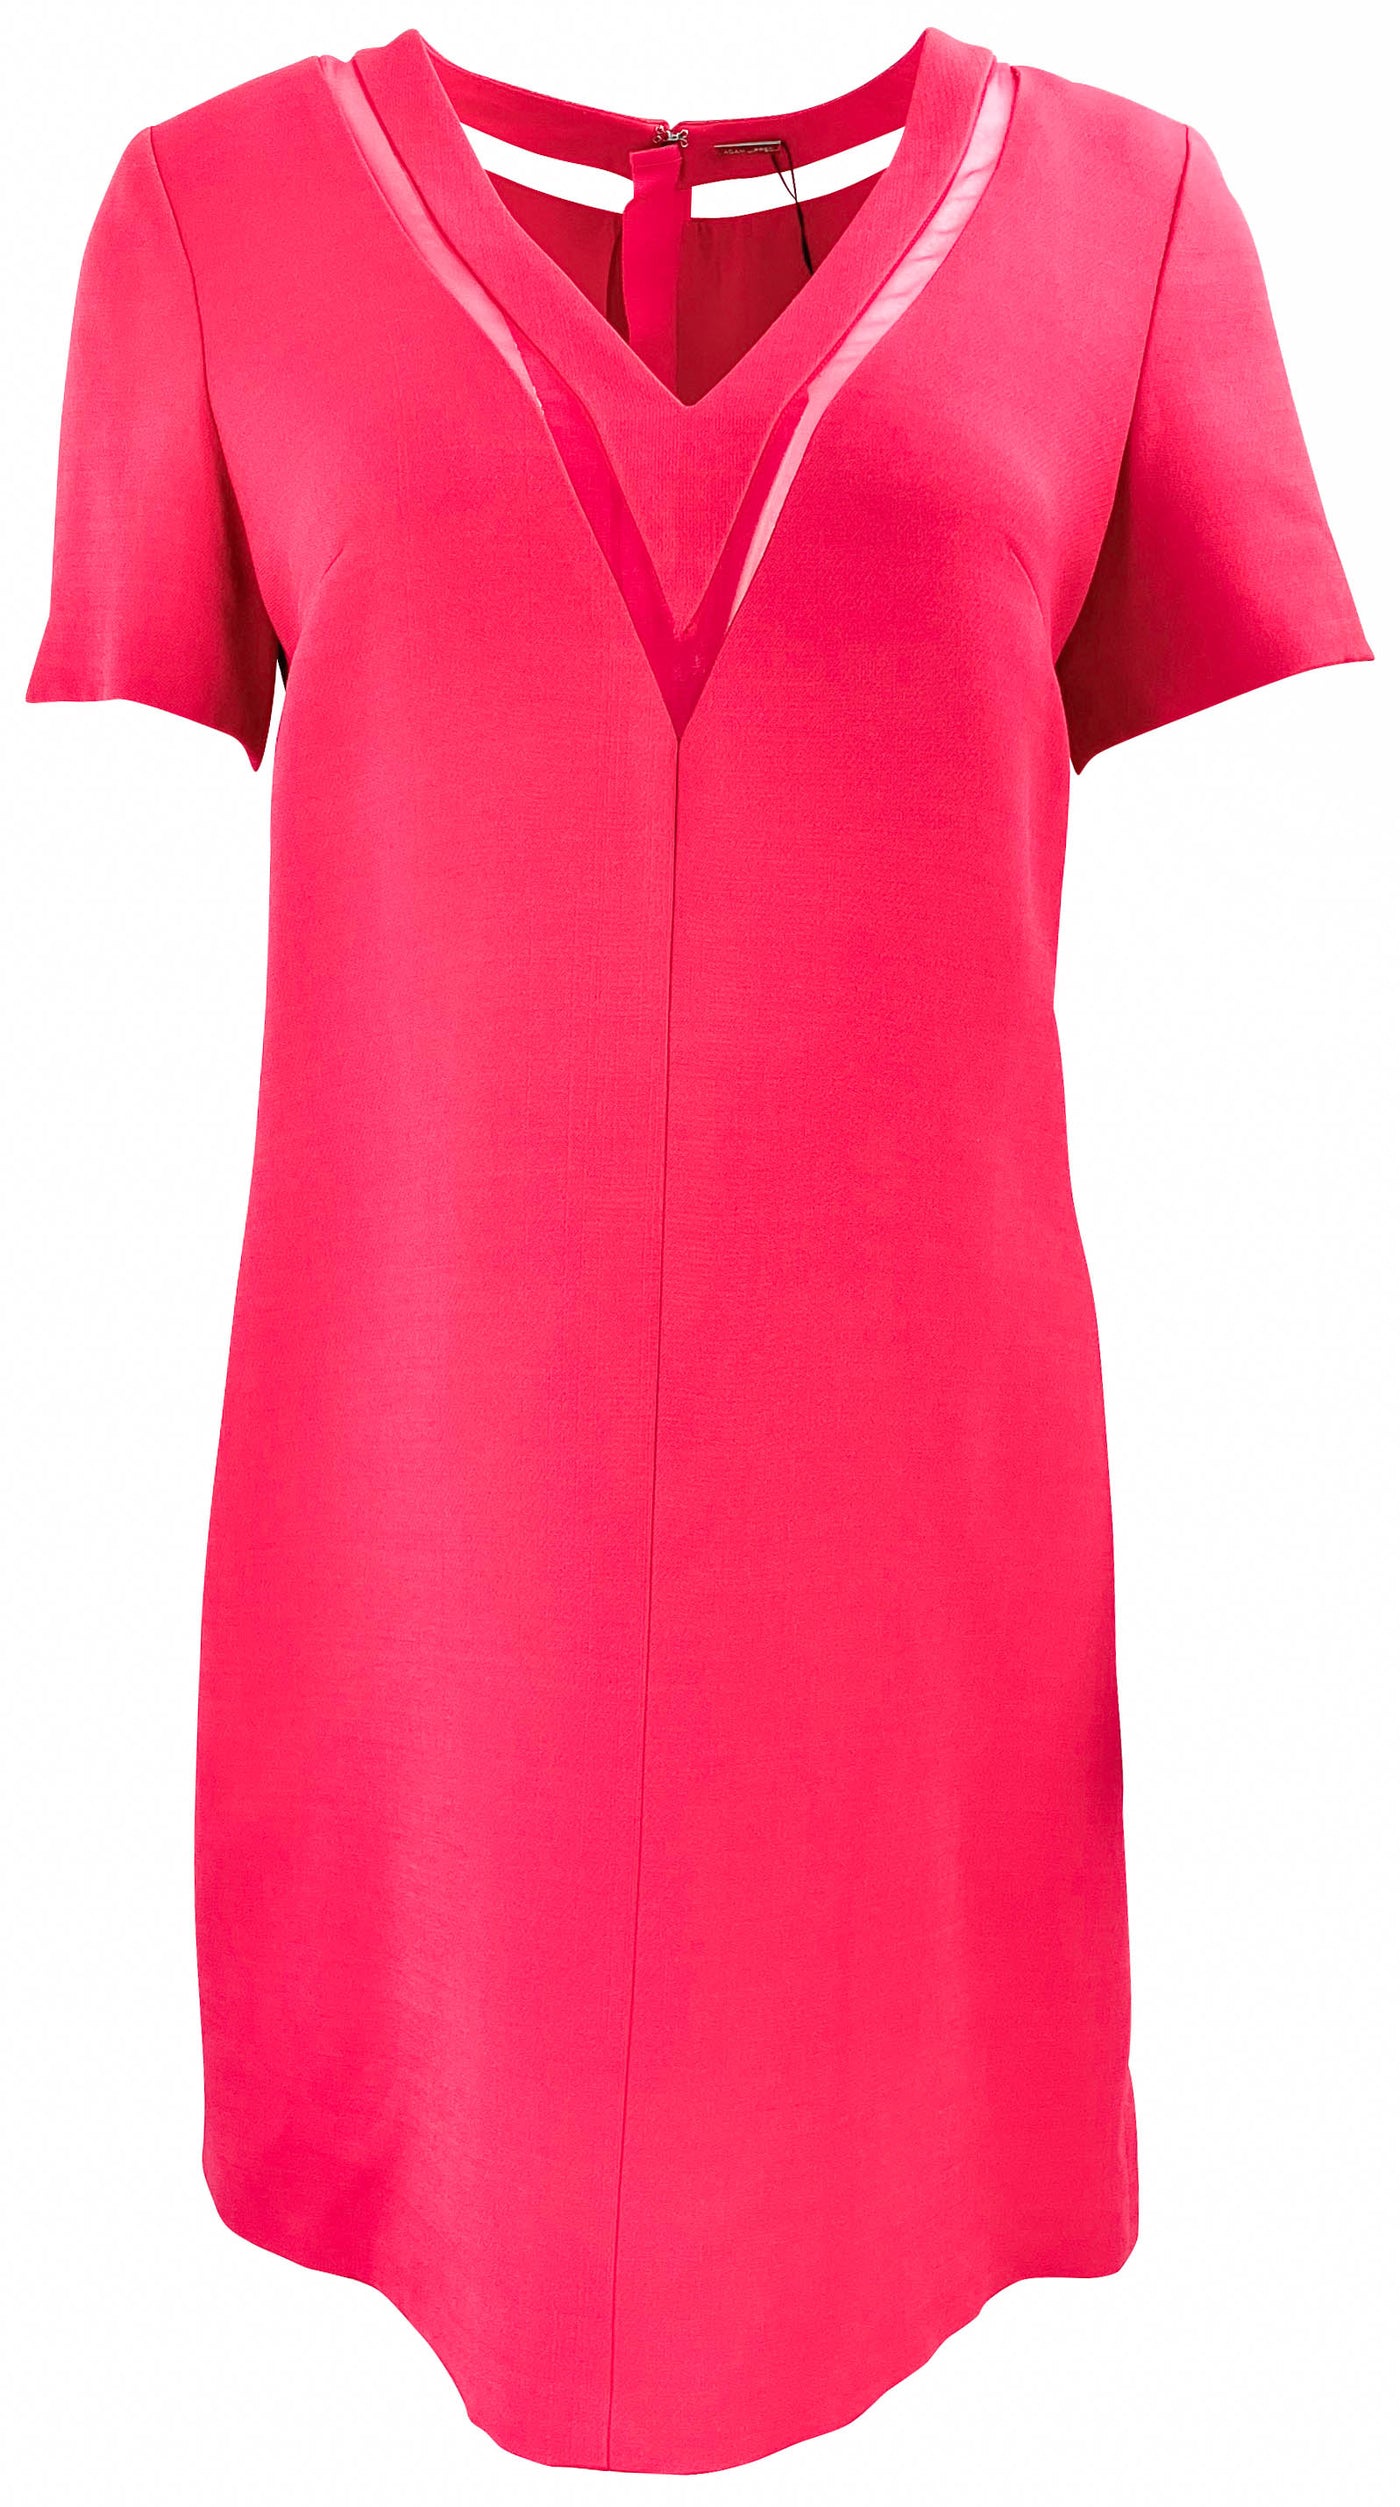 Adam Lippes V-Neck Illusion Dress in Raspberry - Discounts on Adam Lippes at UAL